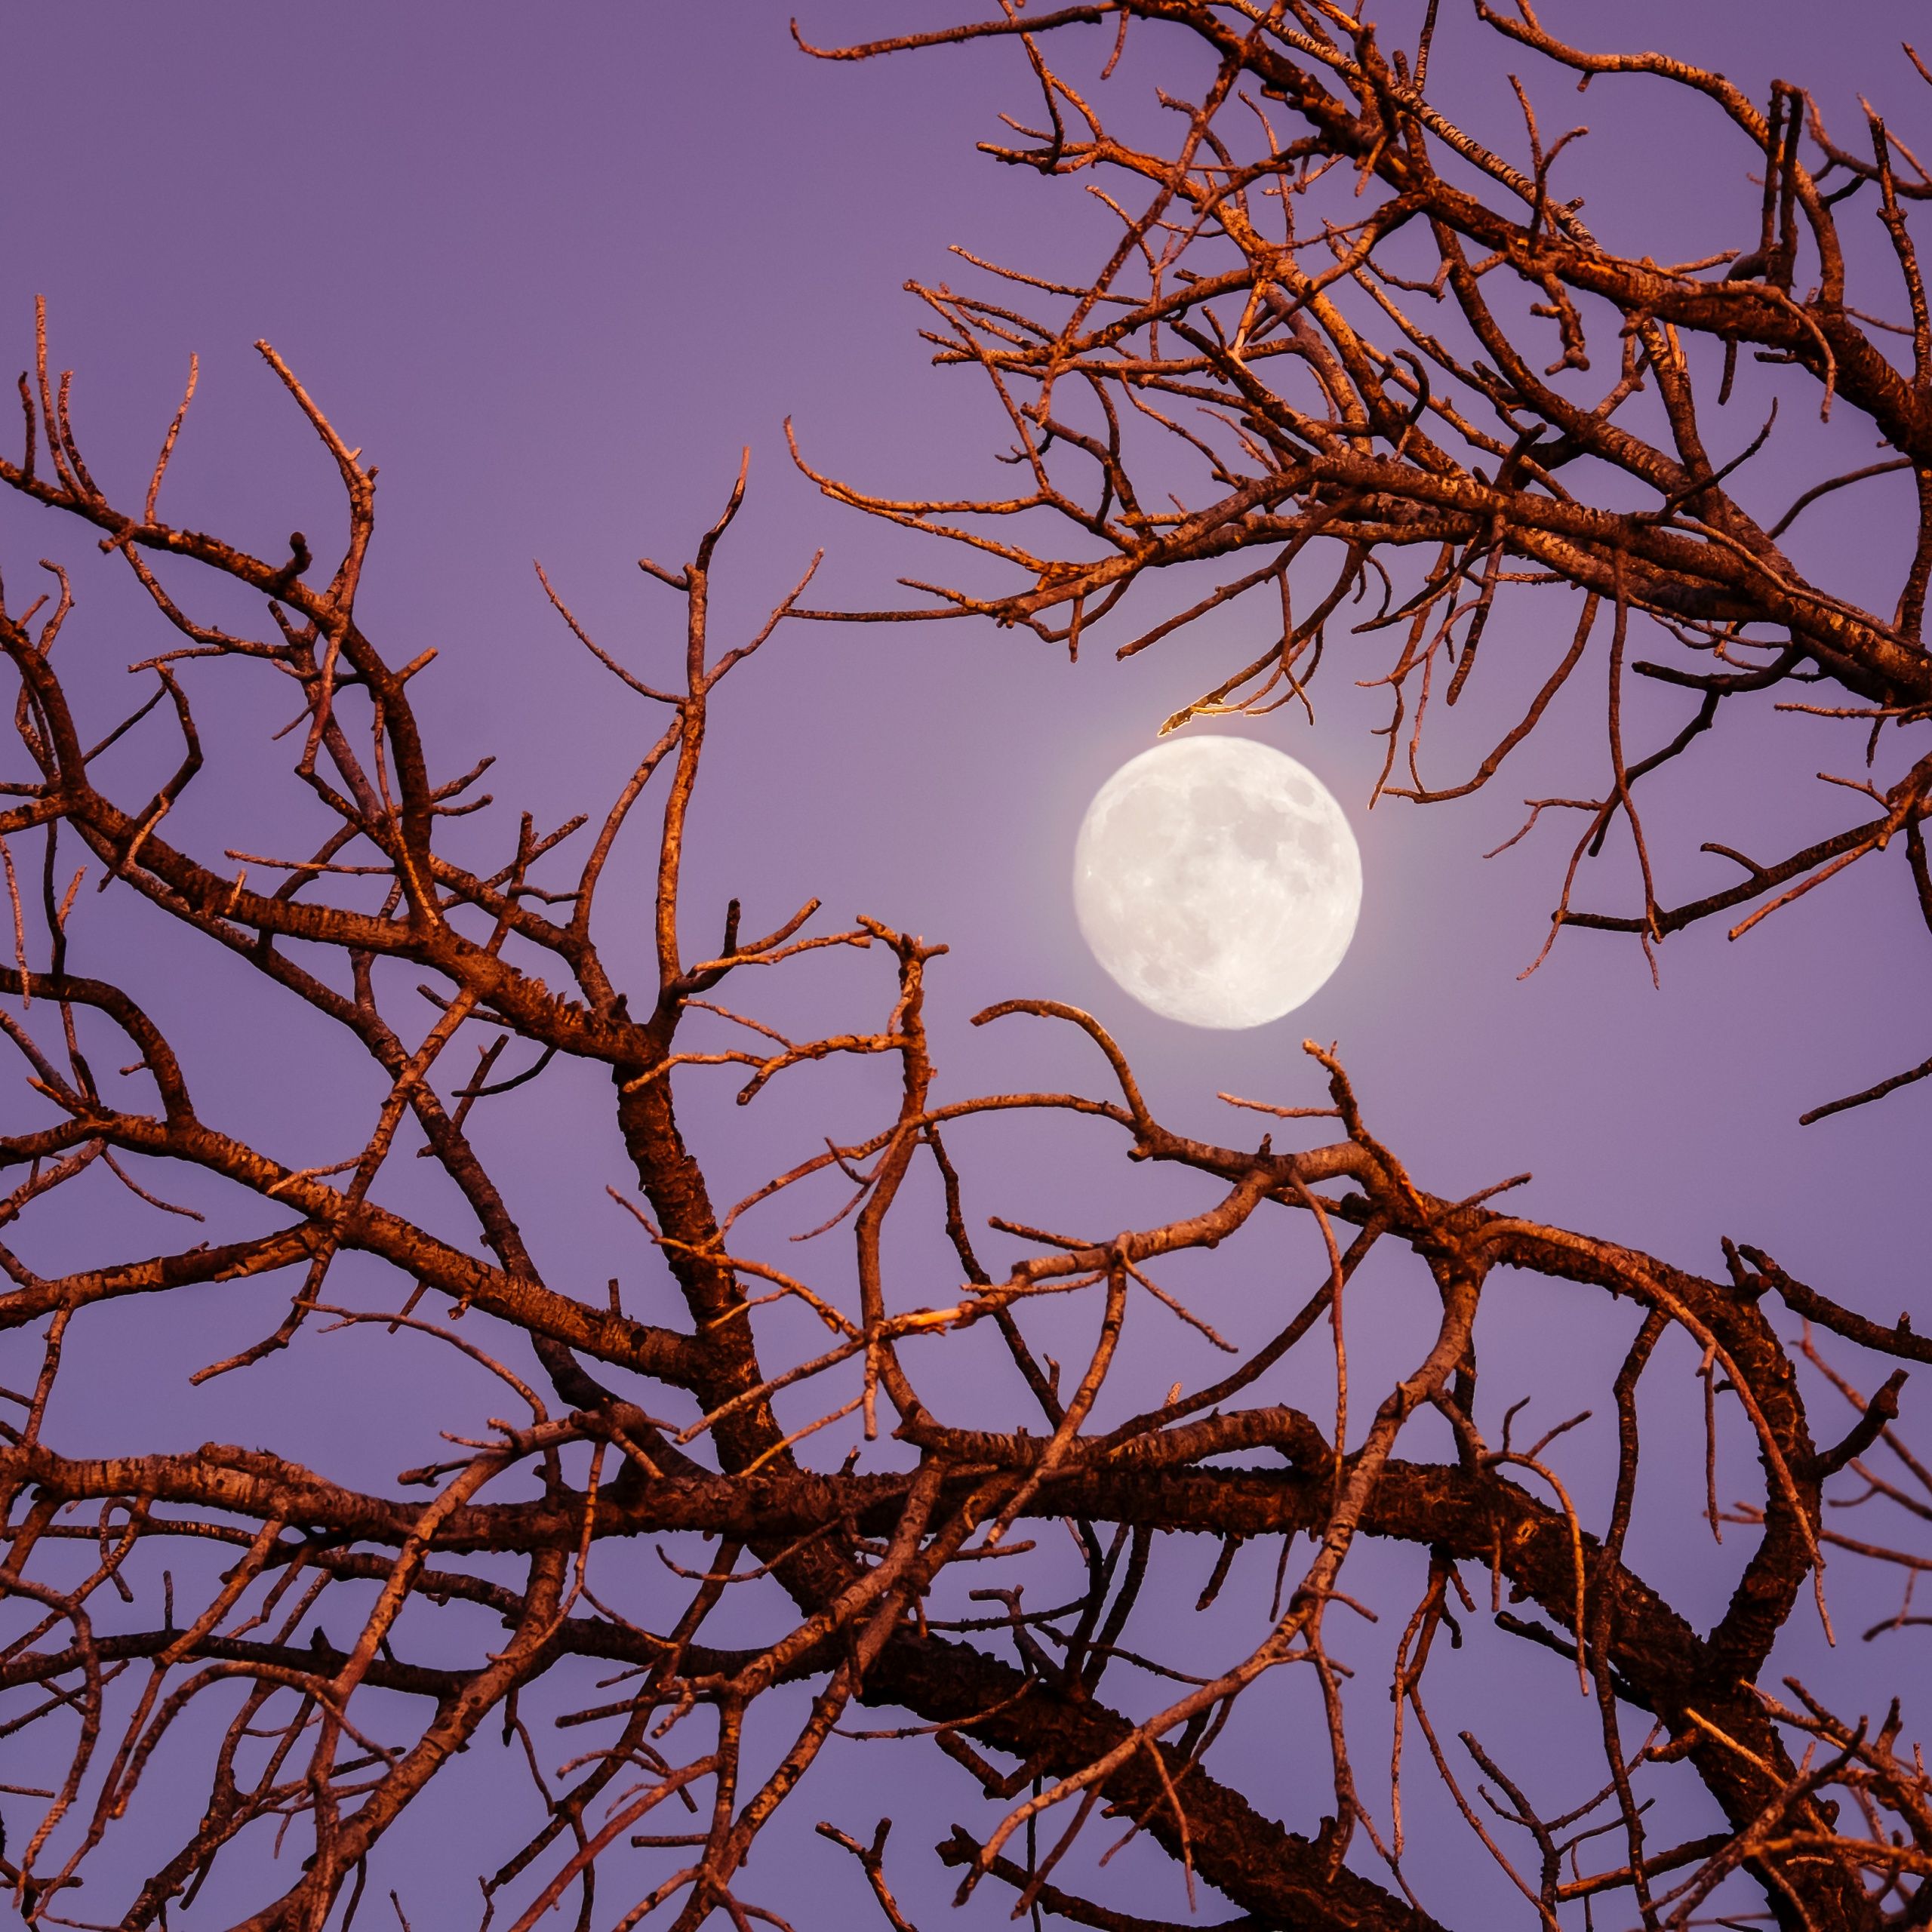 A full moon shines through the branches of a tree - Twilight, moon